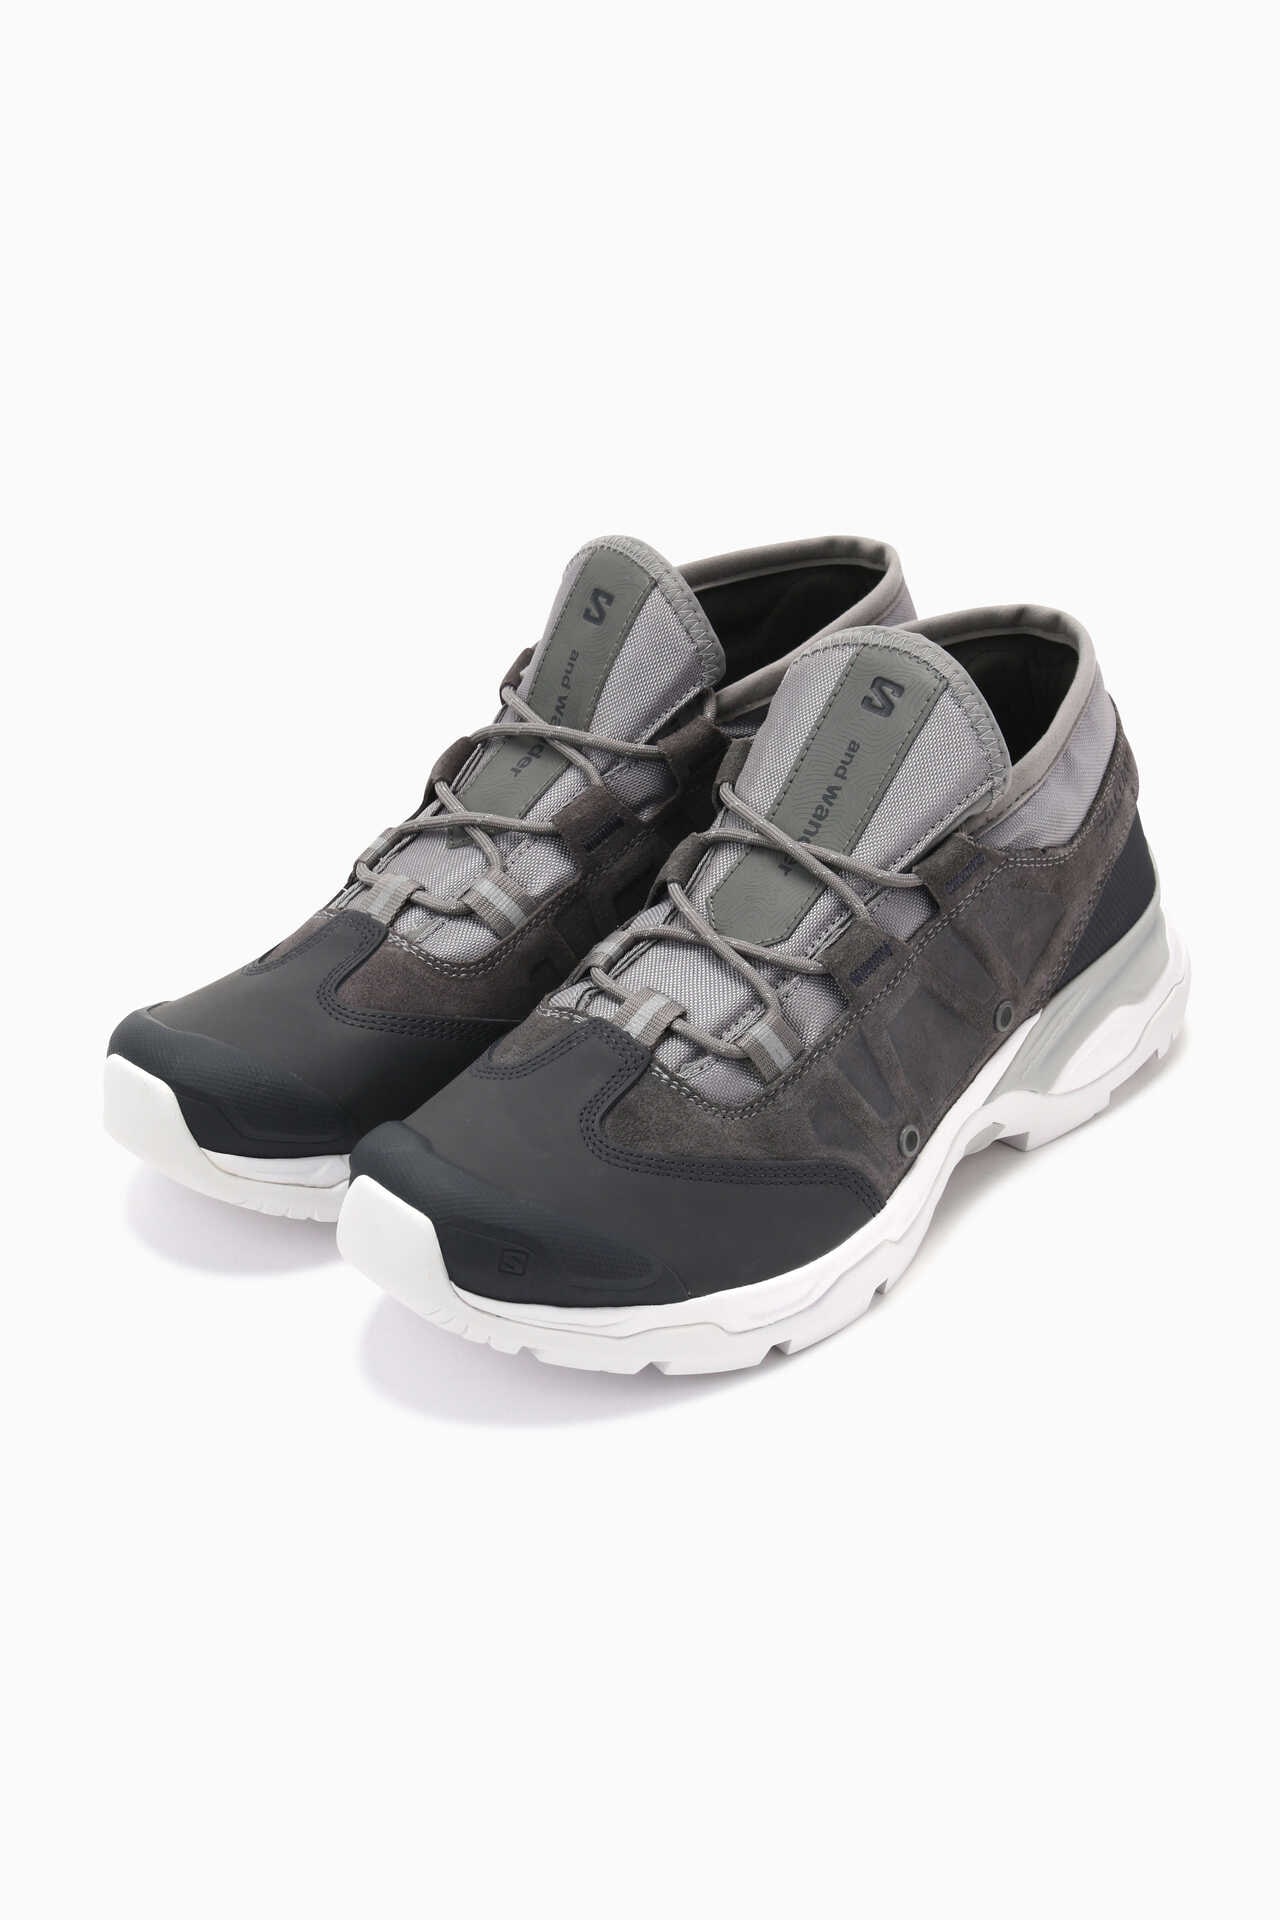 SALOMON Jungle Ultra low for and wander | footwear | and wander 